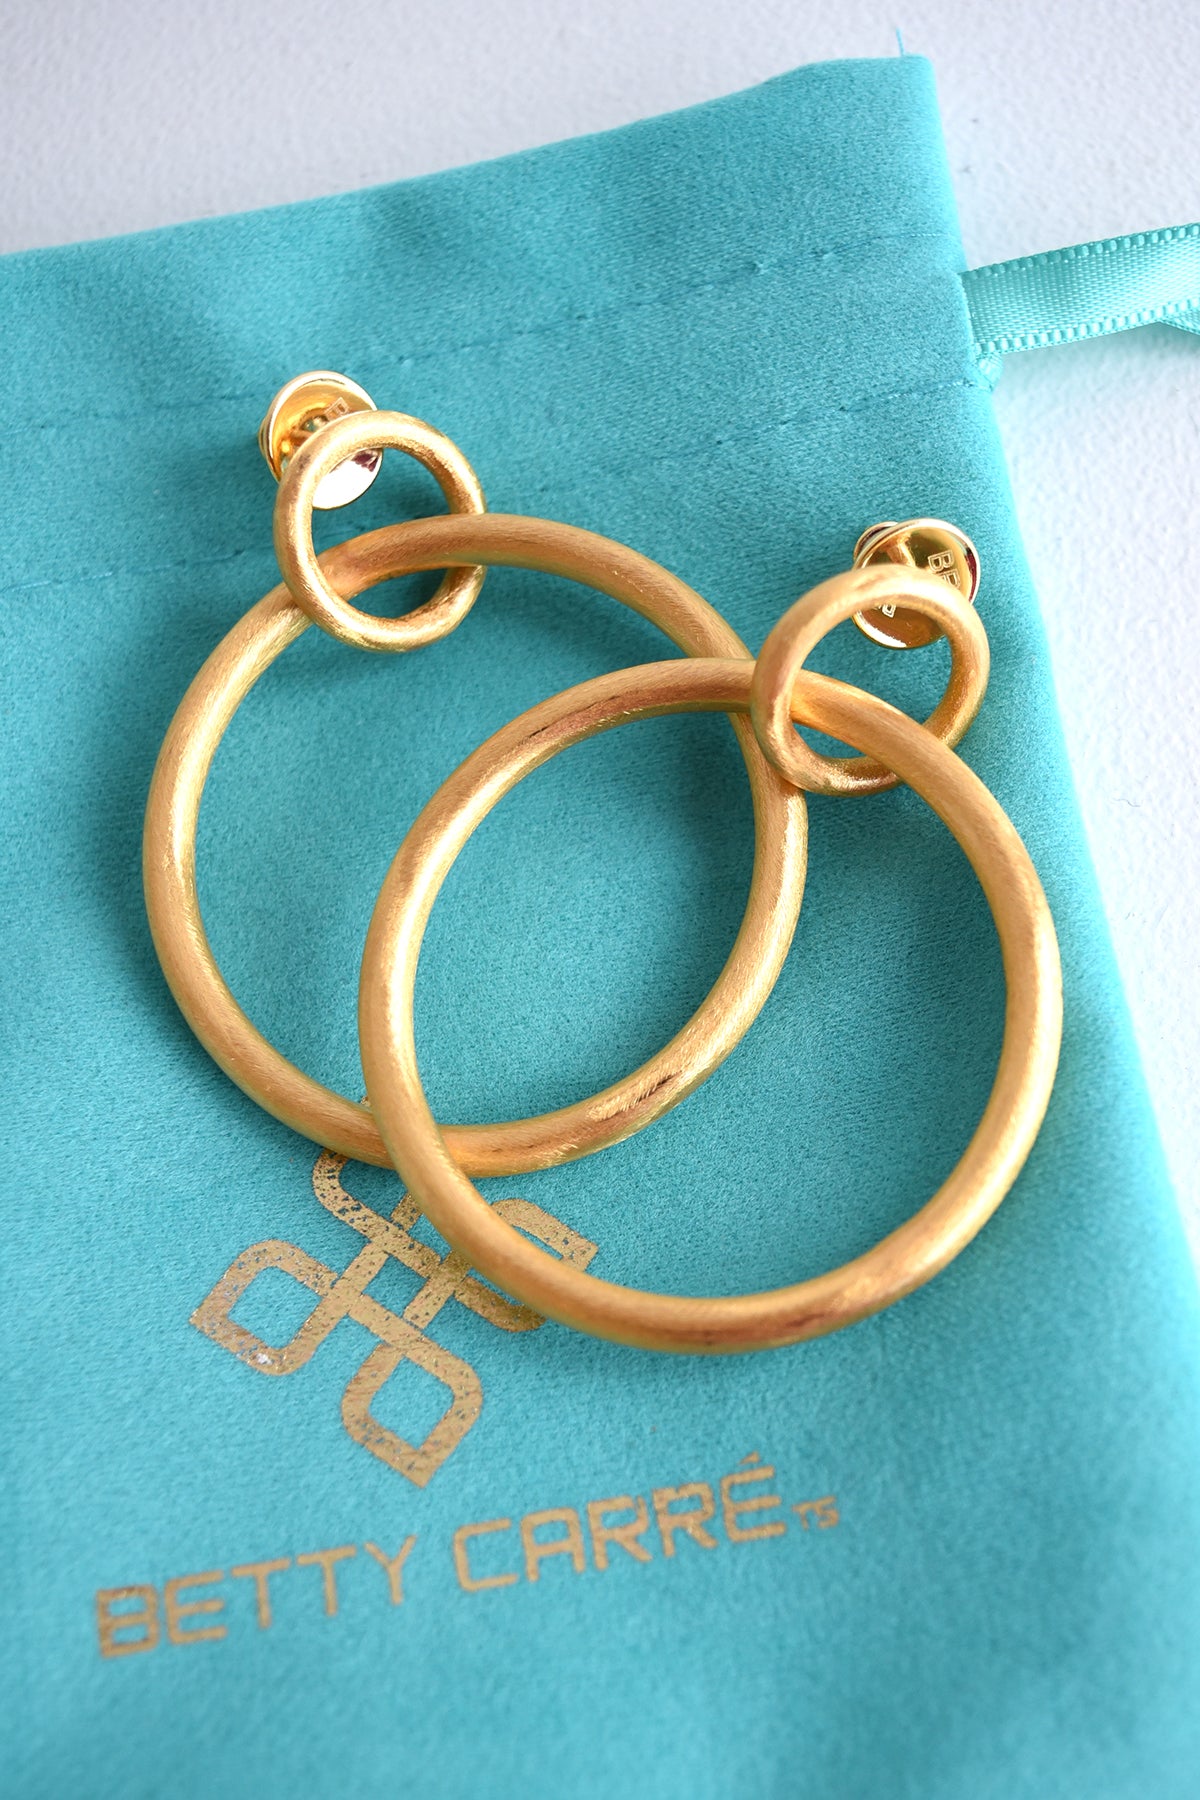 BETTY CARRE GOLD LINK ROUND HOOPS